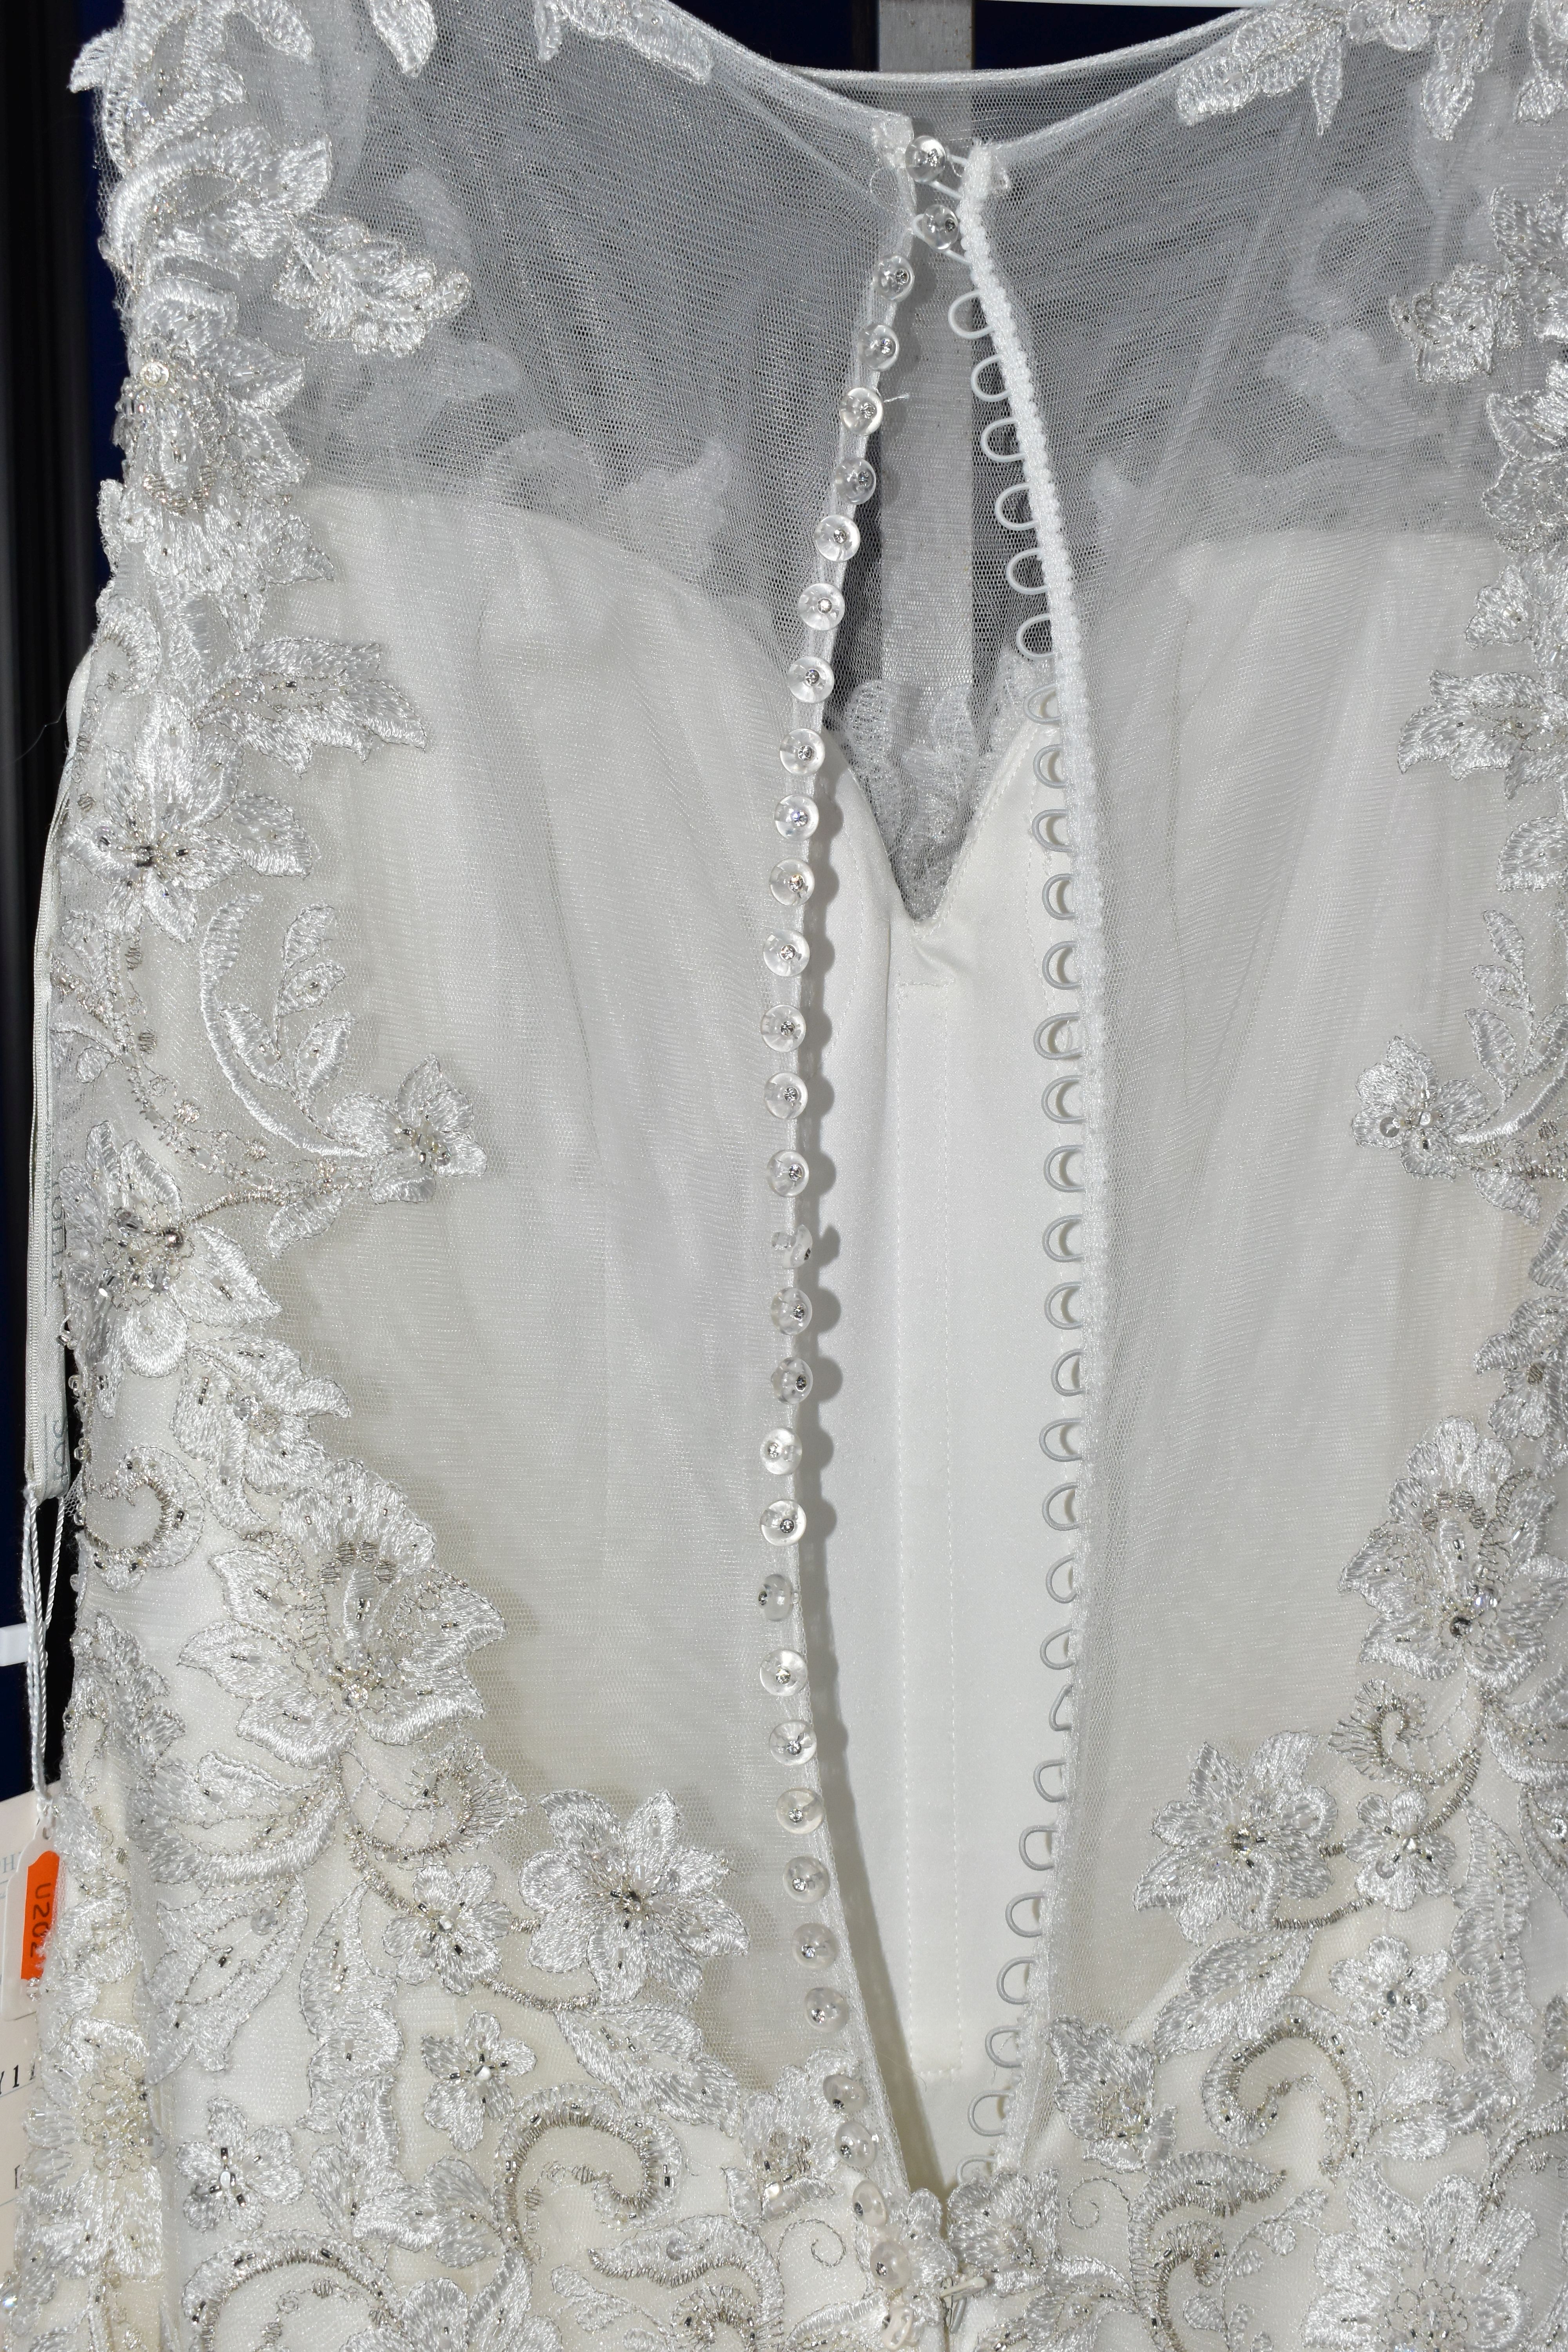 WEDDING DRESS, 'Sophia Tolli', ivory, size 6, beaded appliques, button detail along back, dropped - Image 16 of 16